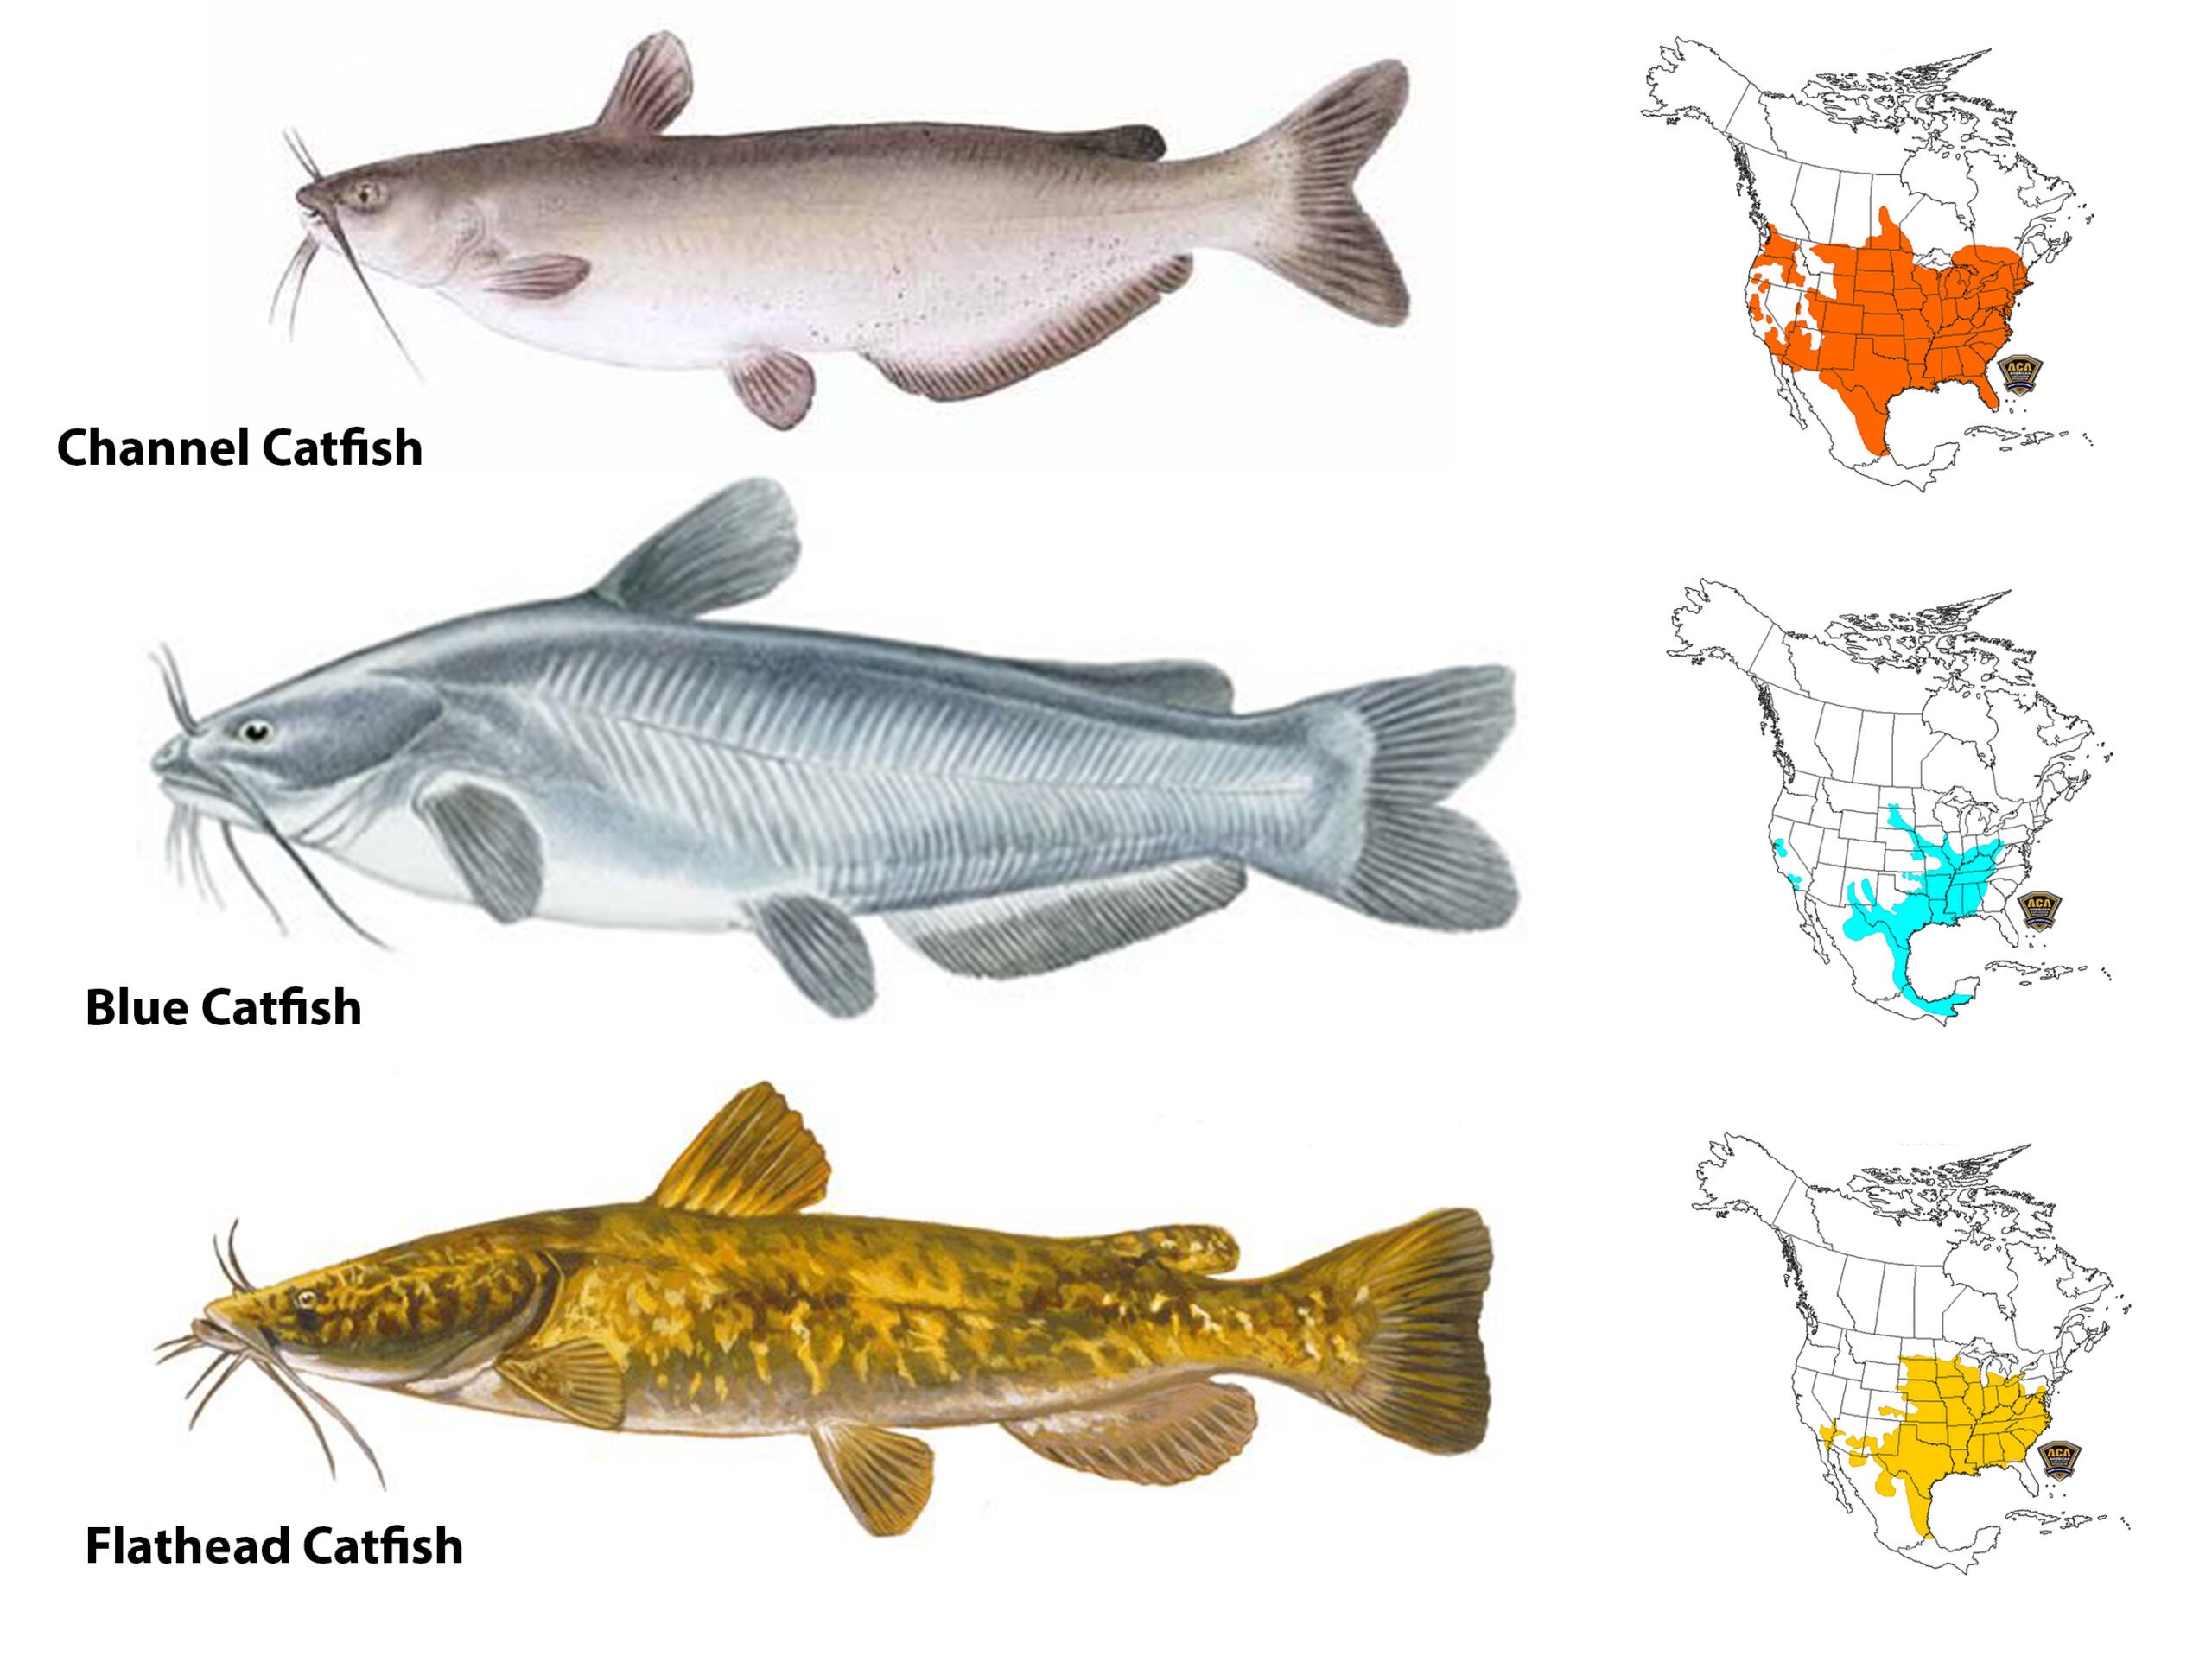 illustration showing the big three types of catfish in the U.S.